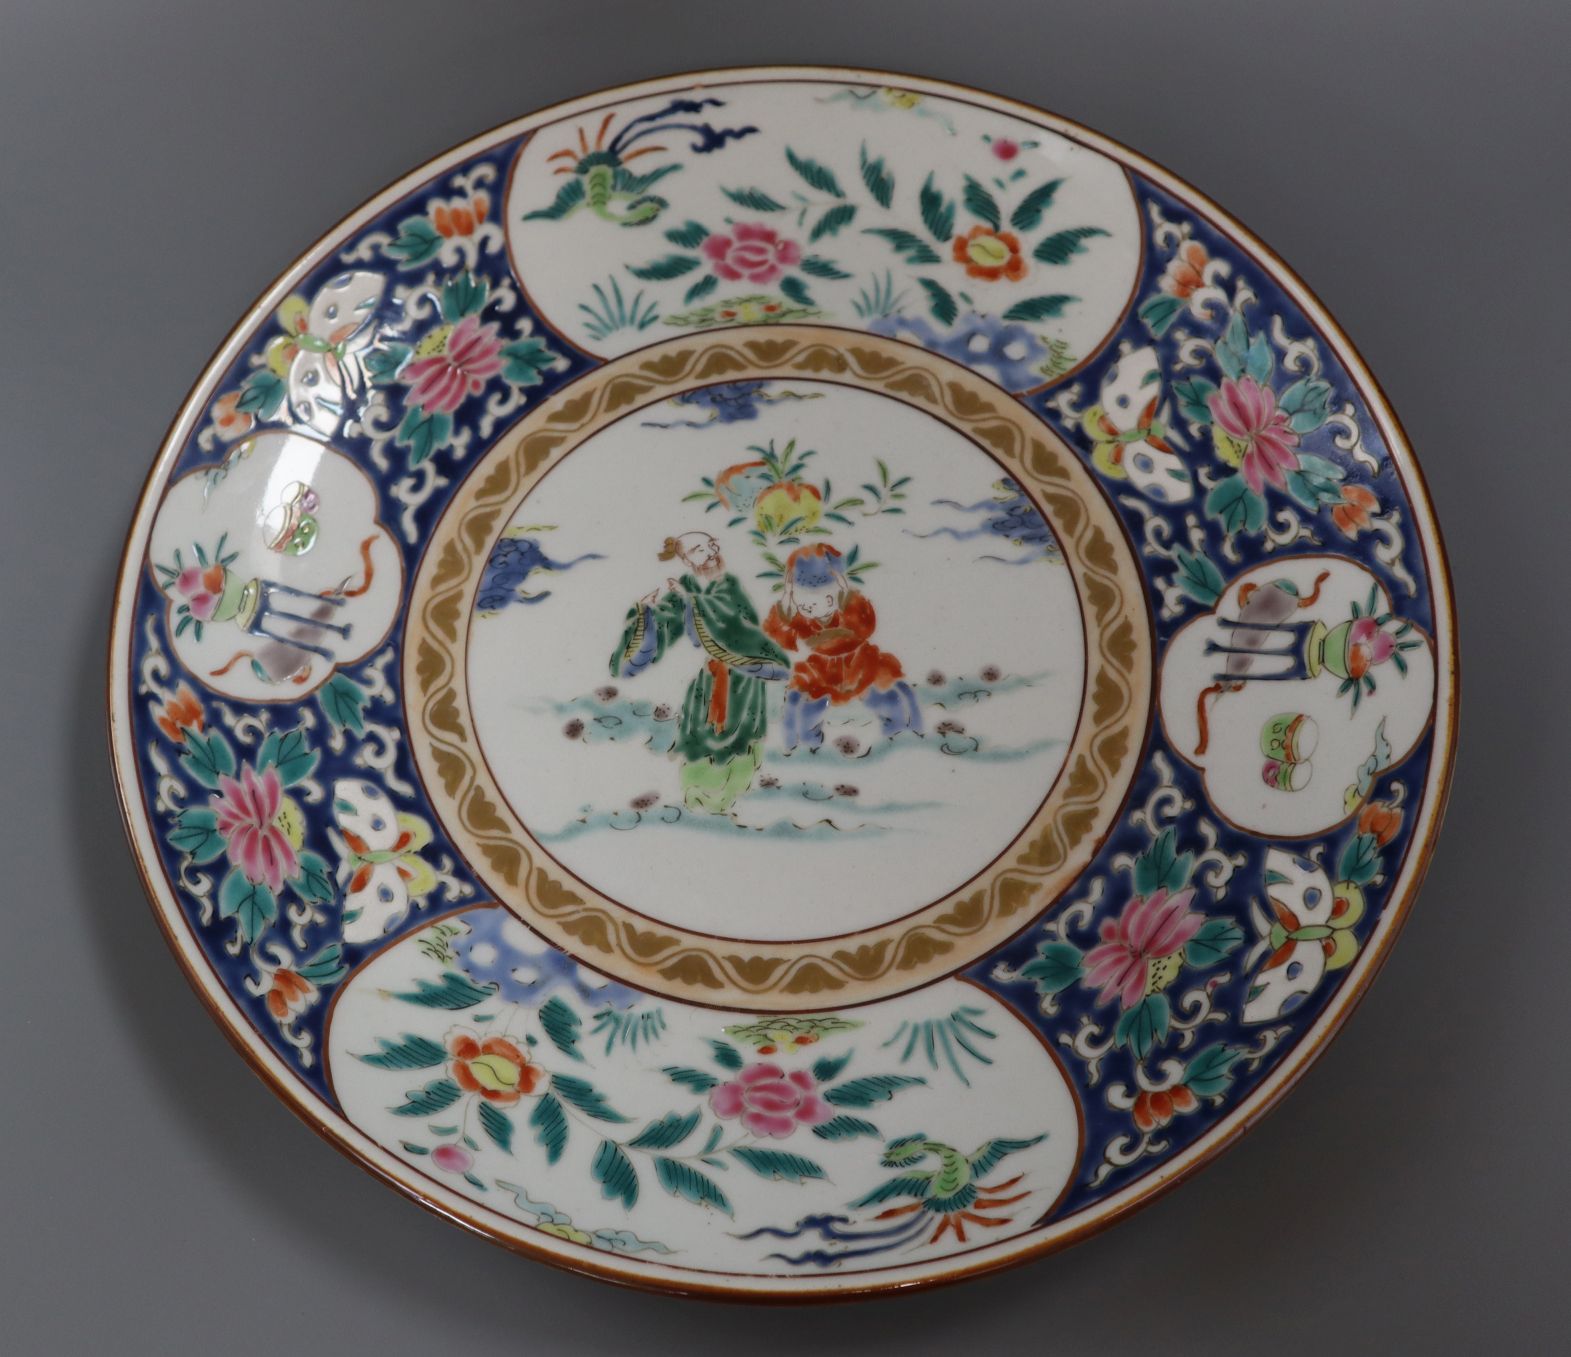 A Japanese polychrome-decorated charger, painted with figures, flowers and insects in reserves,